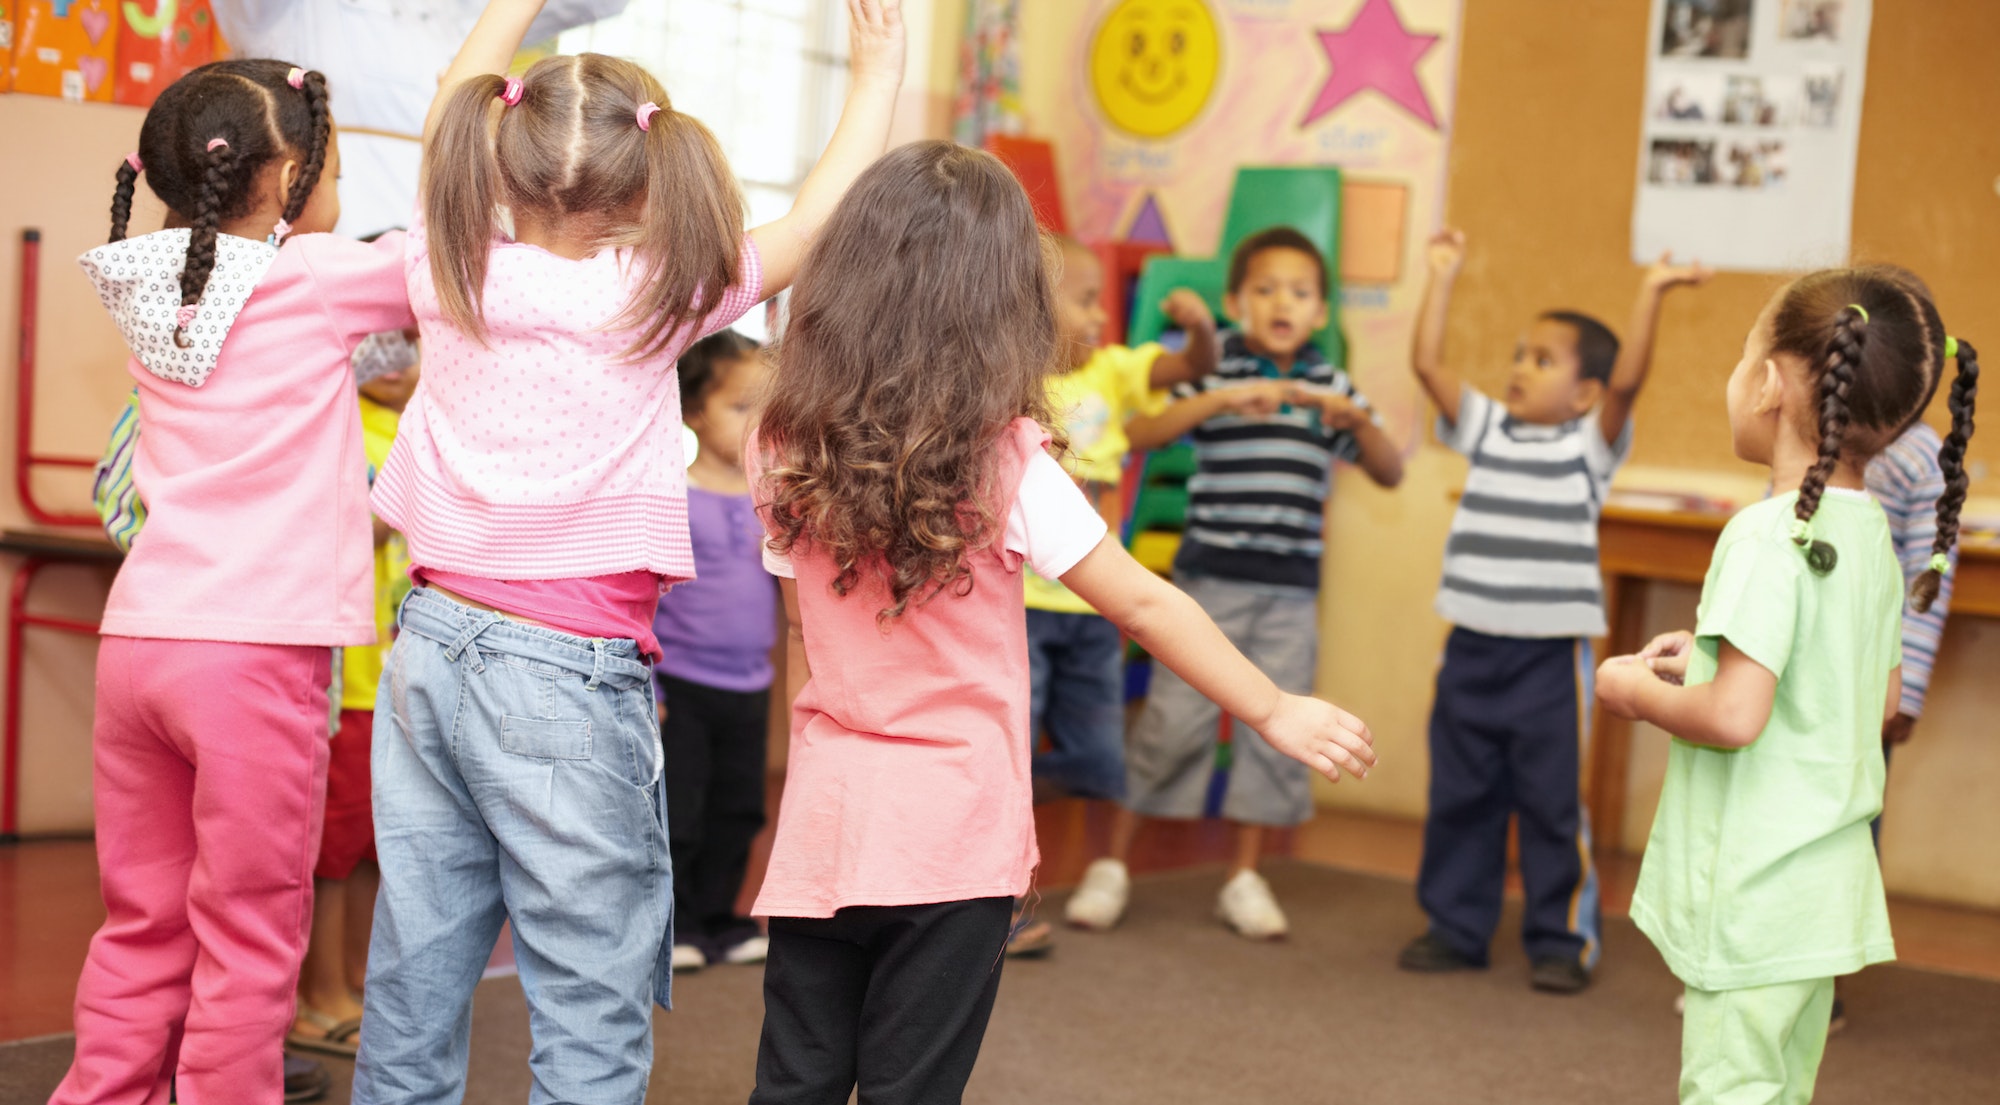 Dancing to get rid of all the energy. Preschool students jumping and dancing around having fun.